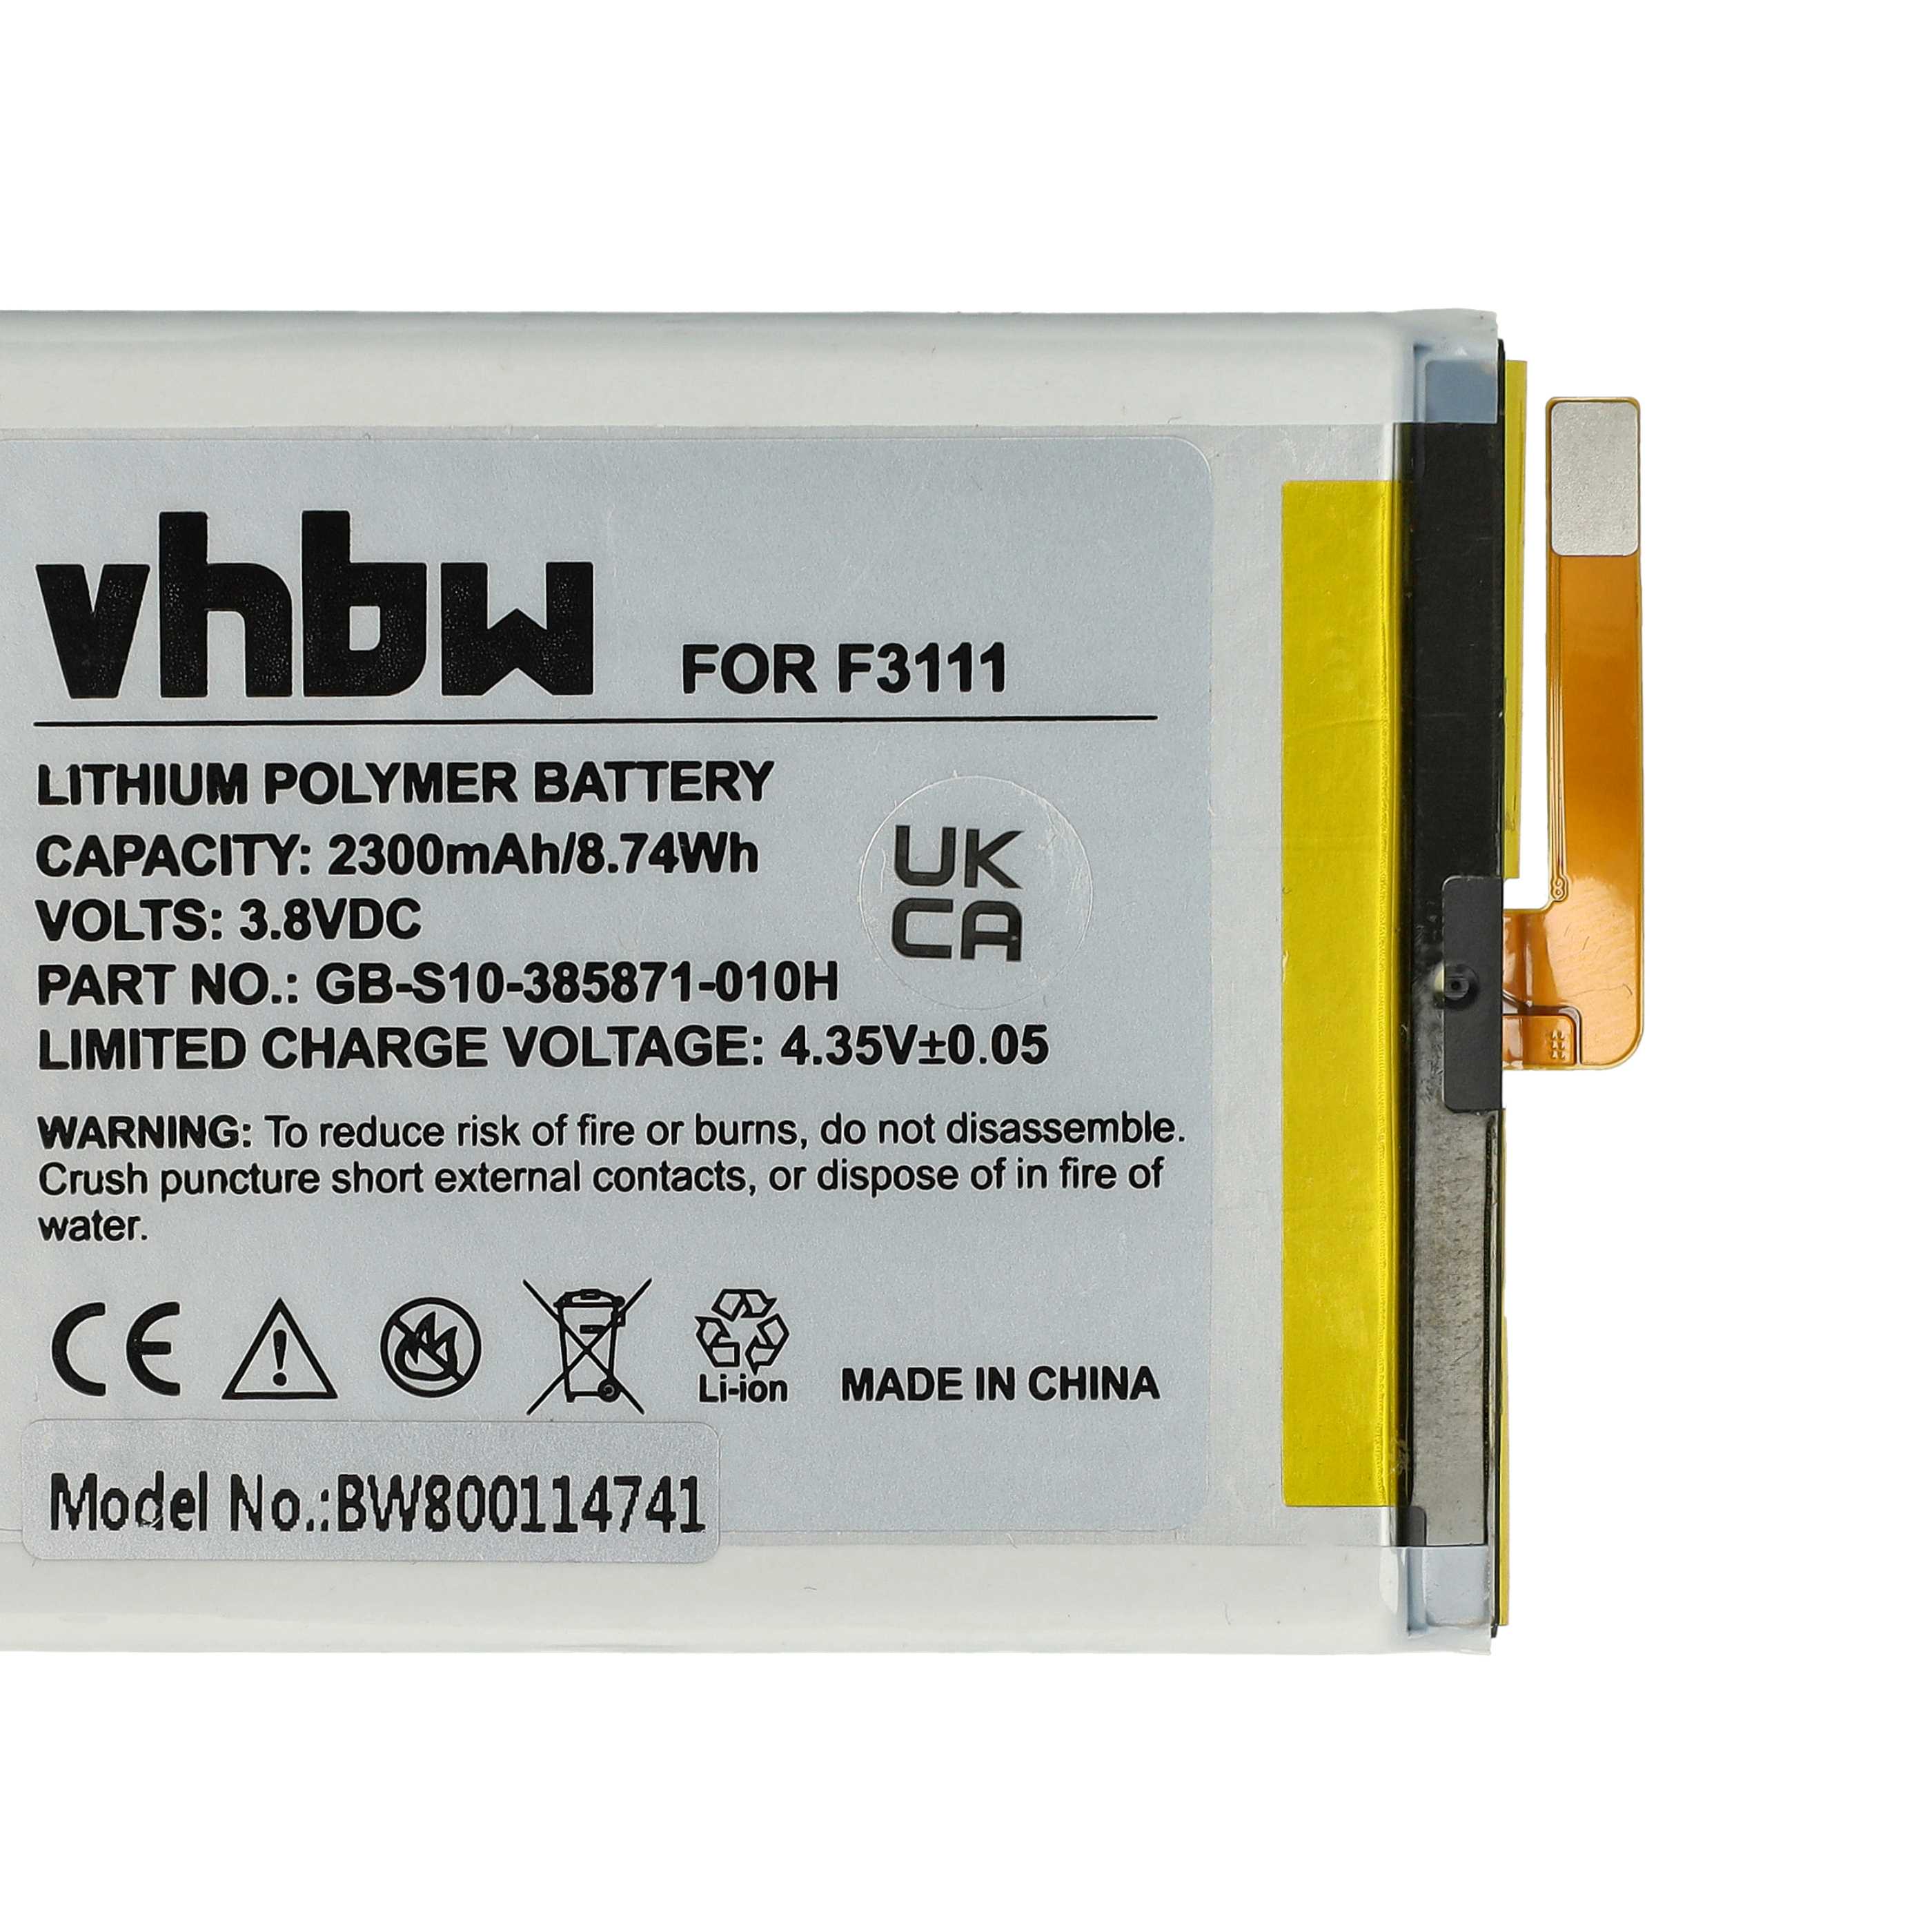 Mobile Phone Battery Replacement for Sony GB-S10-385871-010H - 2300mAh 3.8V Li-polymer